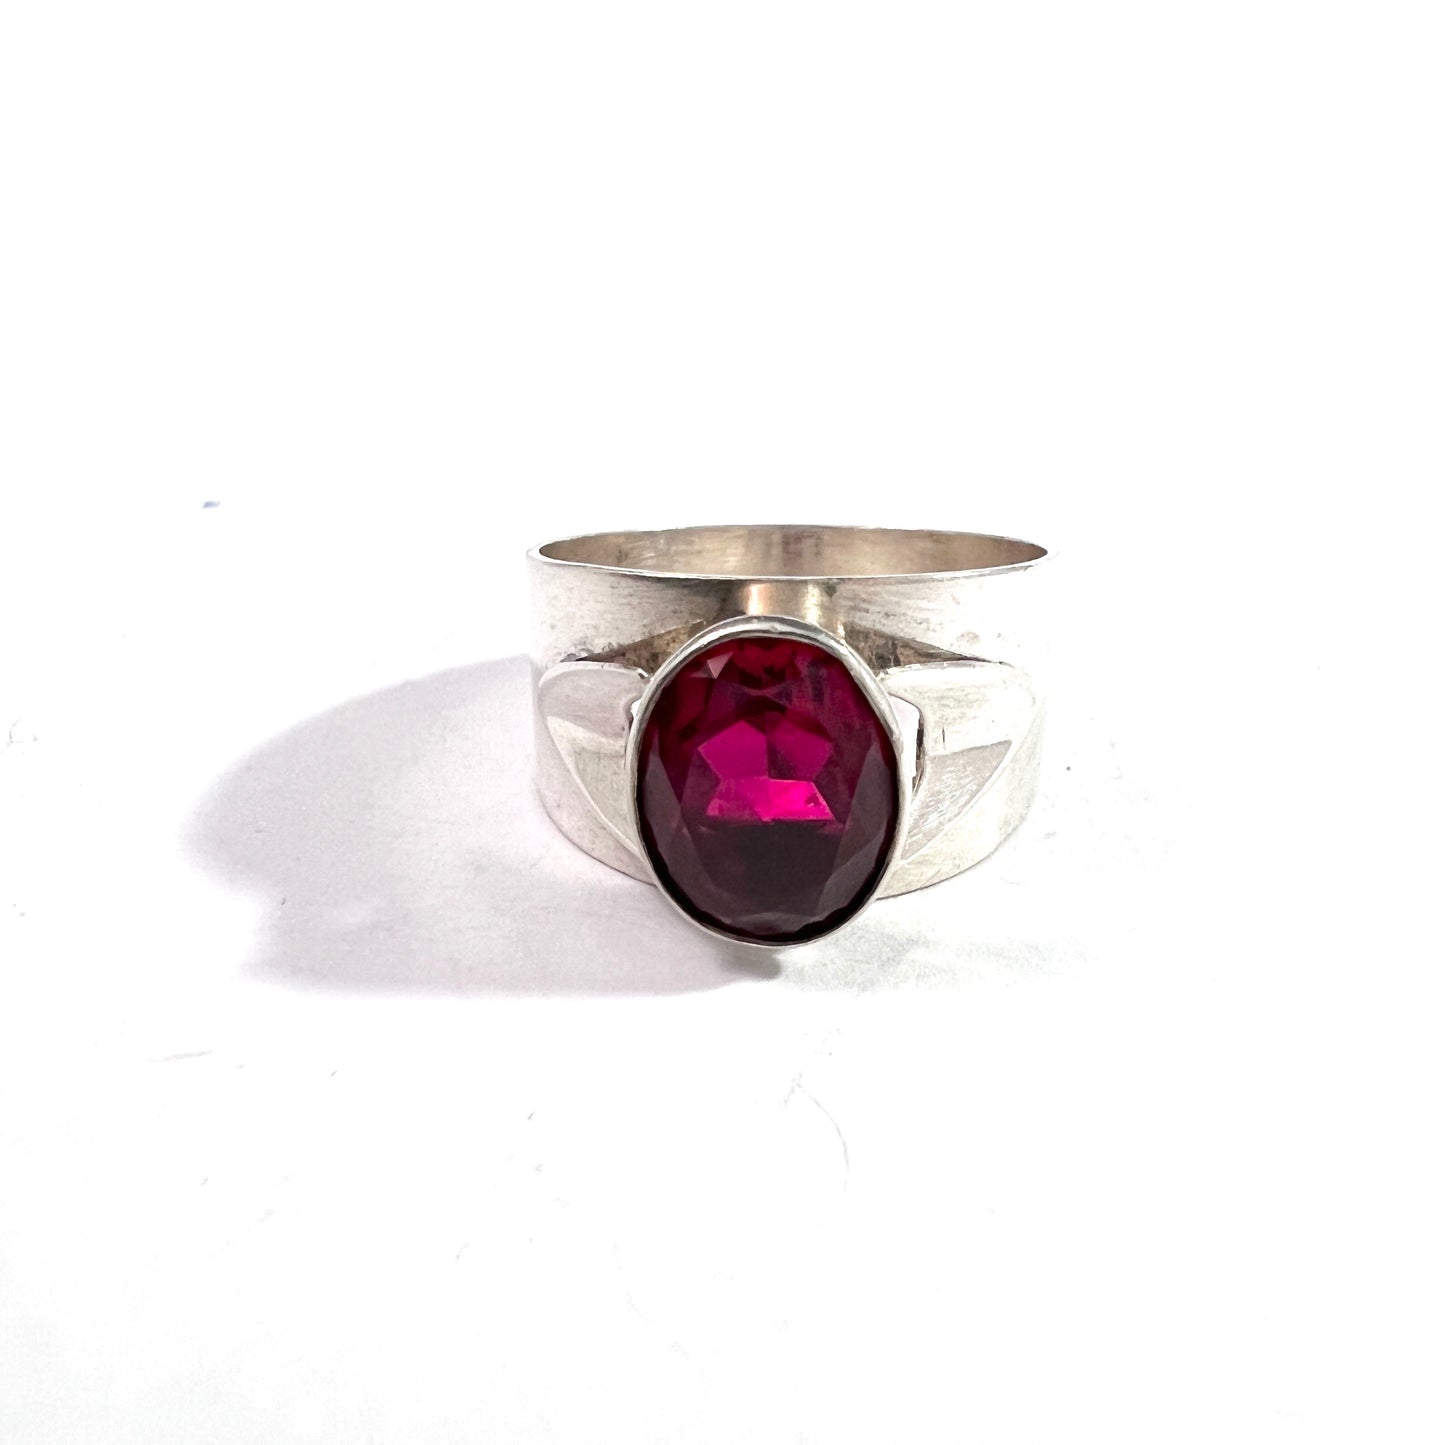 Pentti Lehtisalo, Finland 1971. Vintage Solid Silver Synthetic Ruby Ring.